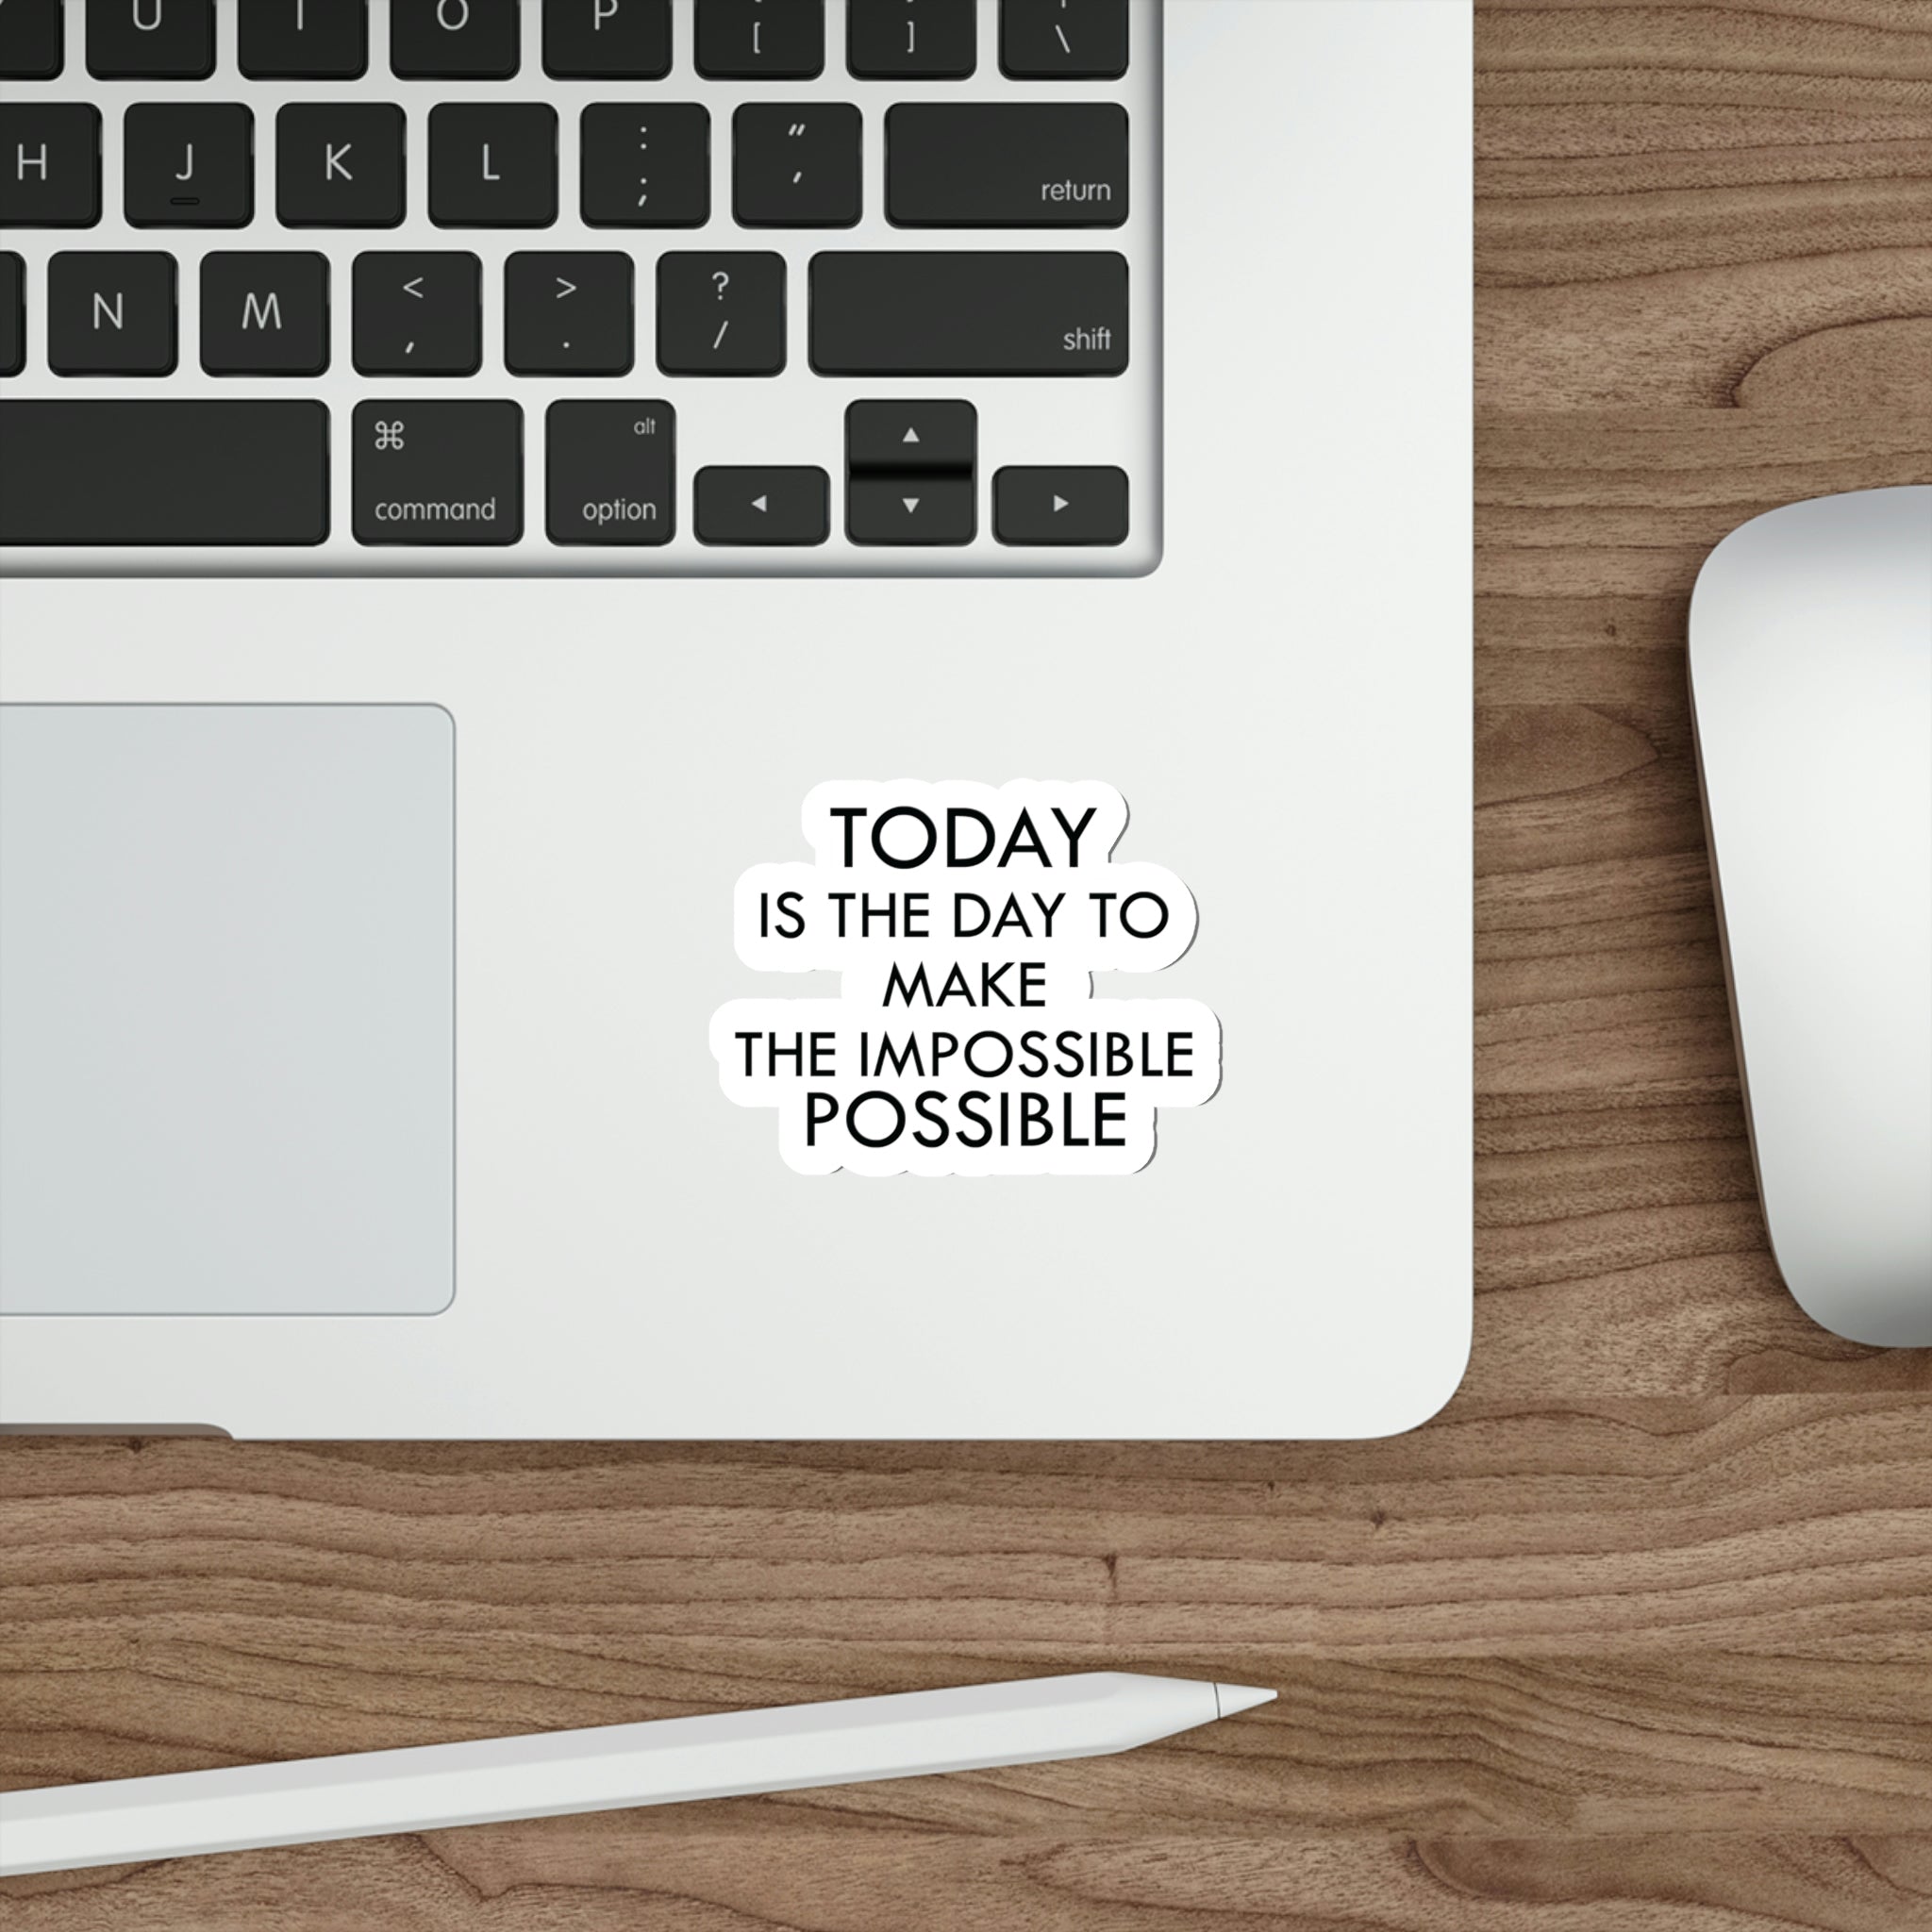 Achieve the Unachievable with This Sticker "Today is the day to make the impossible possible." - Get it Now! #size_3x3-inches